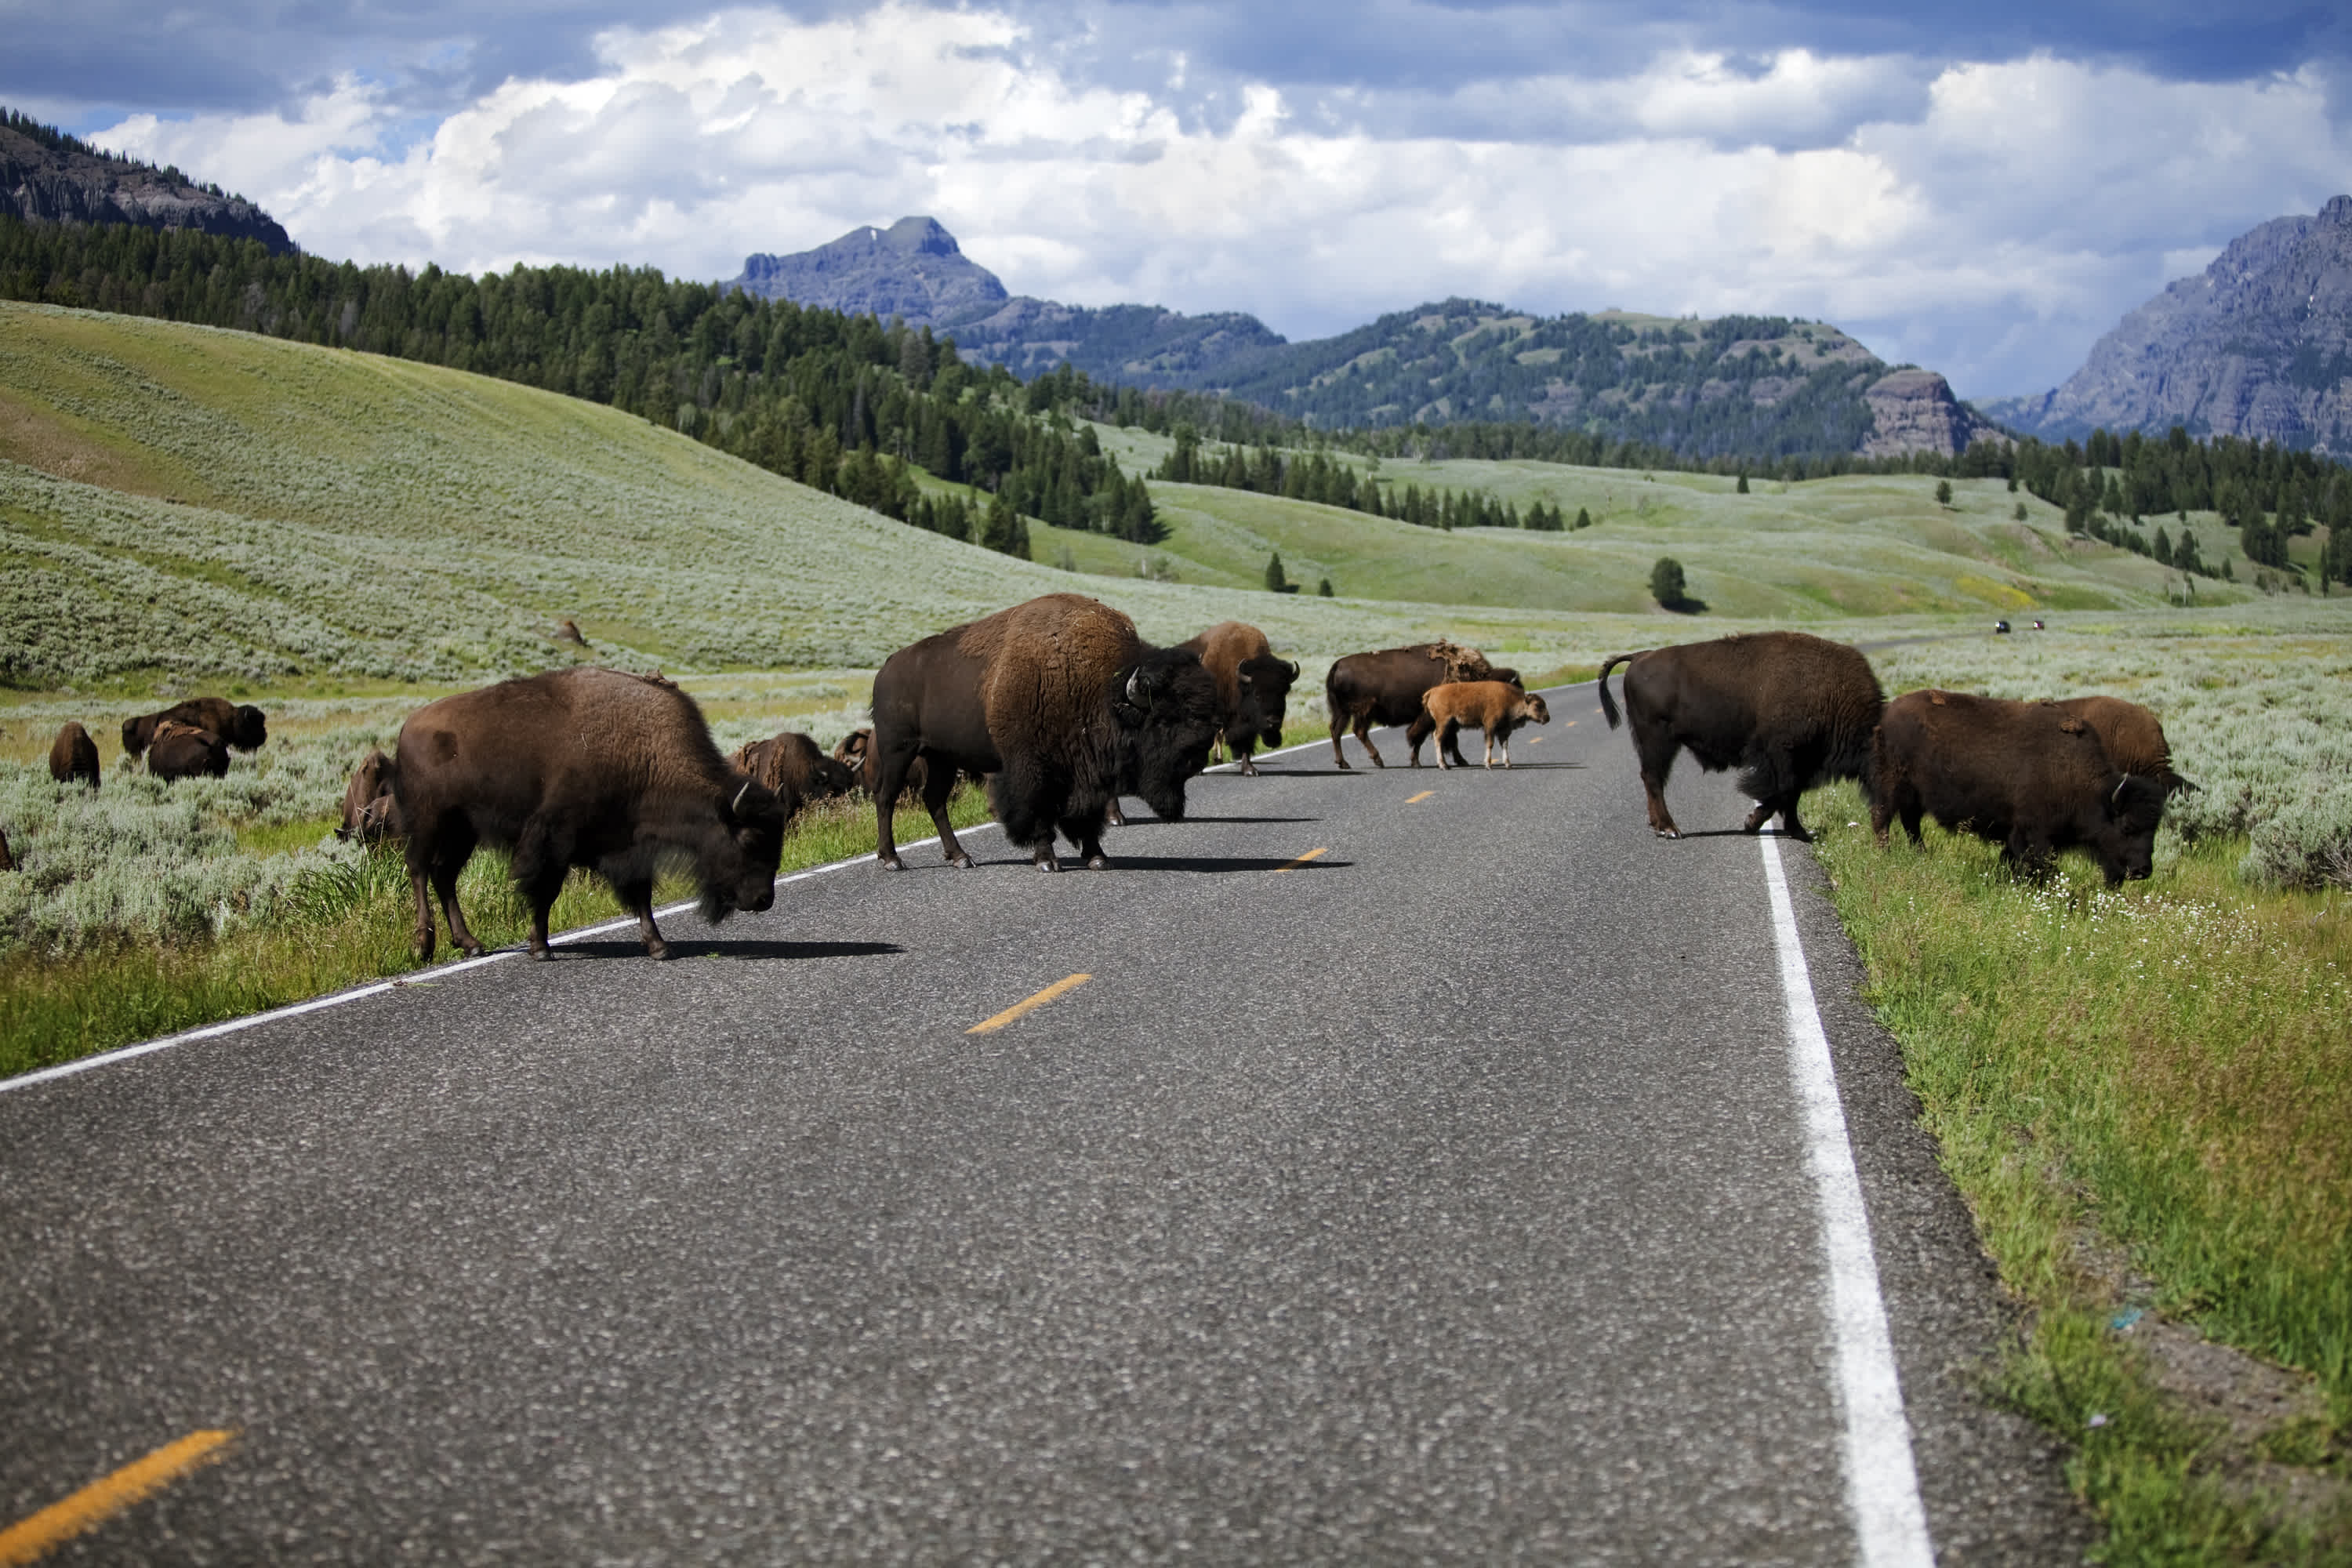 See wild bison in Yellowstone, pictured here crossing the road, as part of a tour of North America